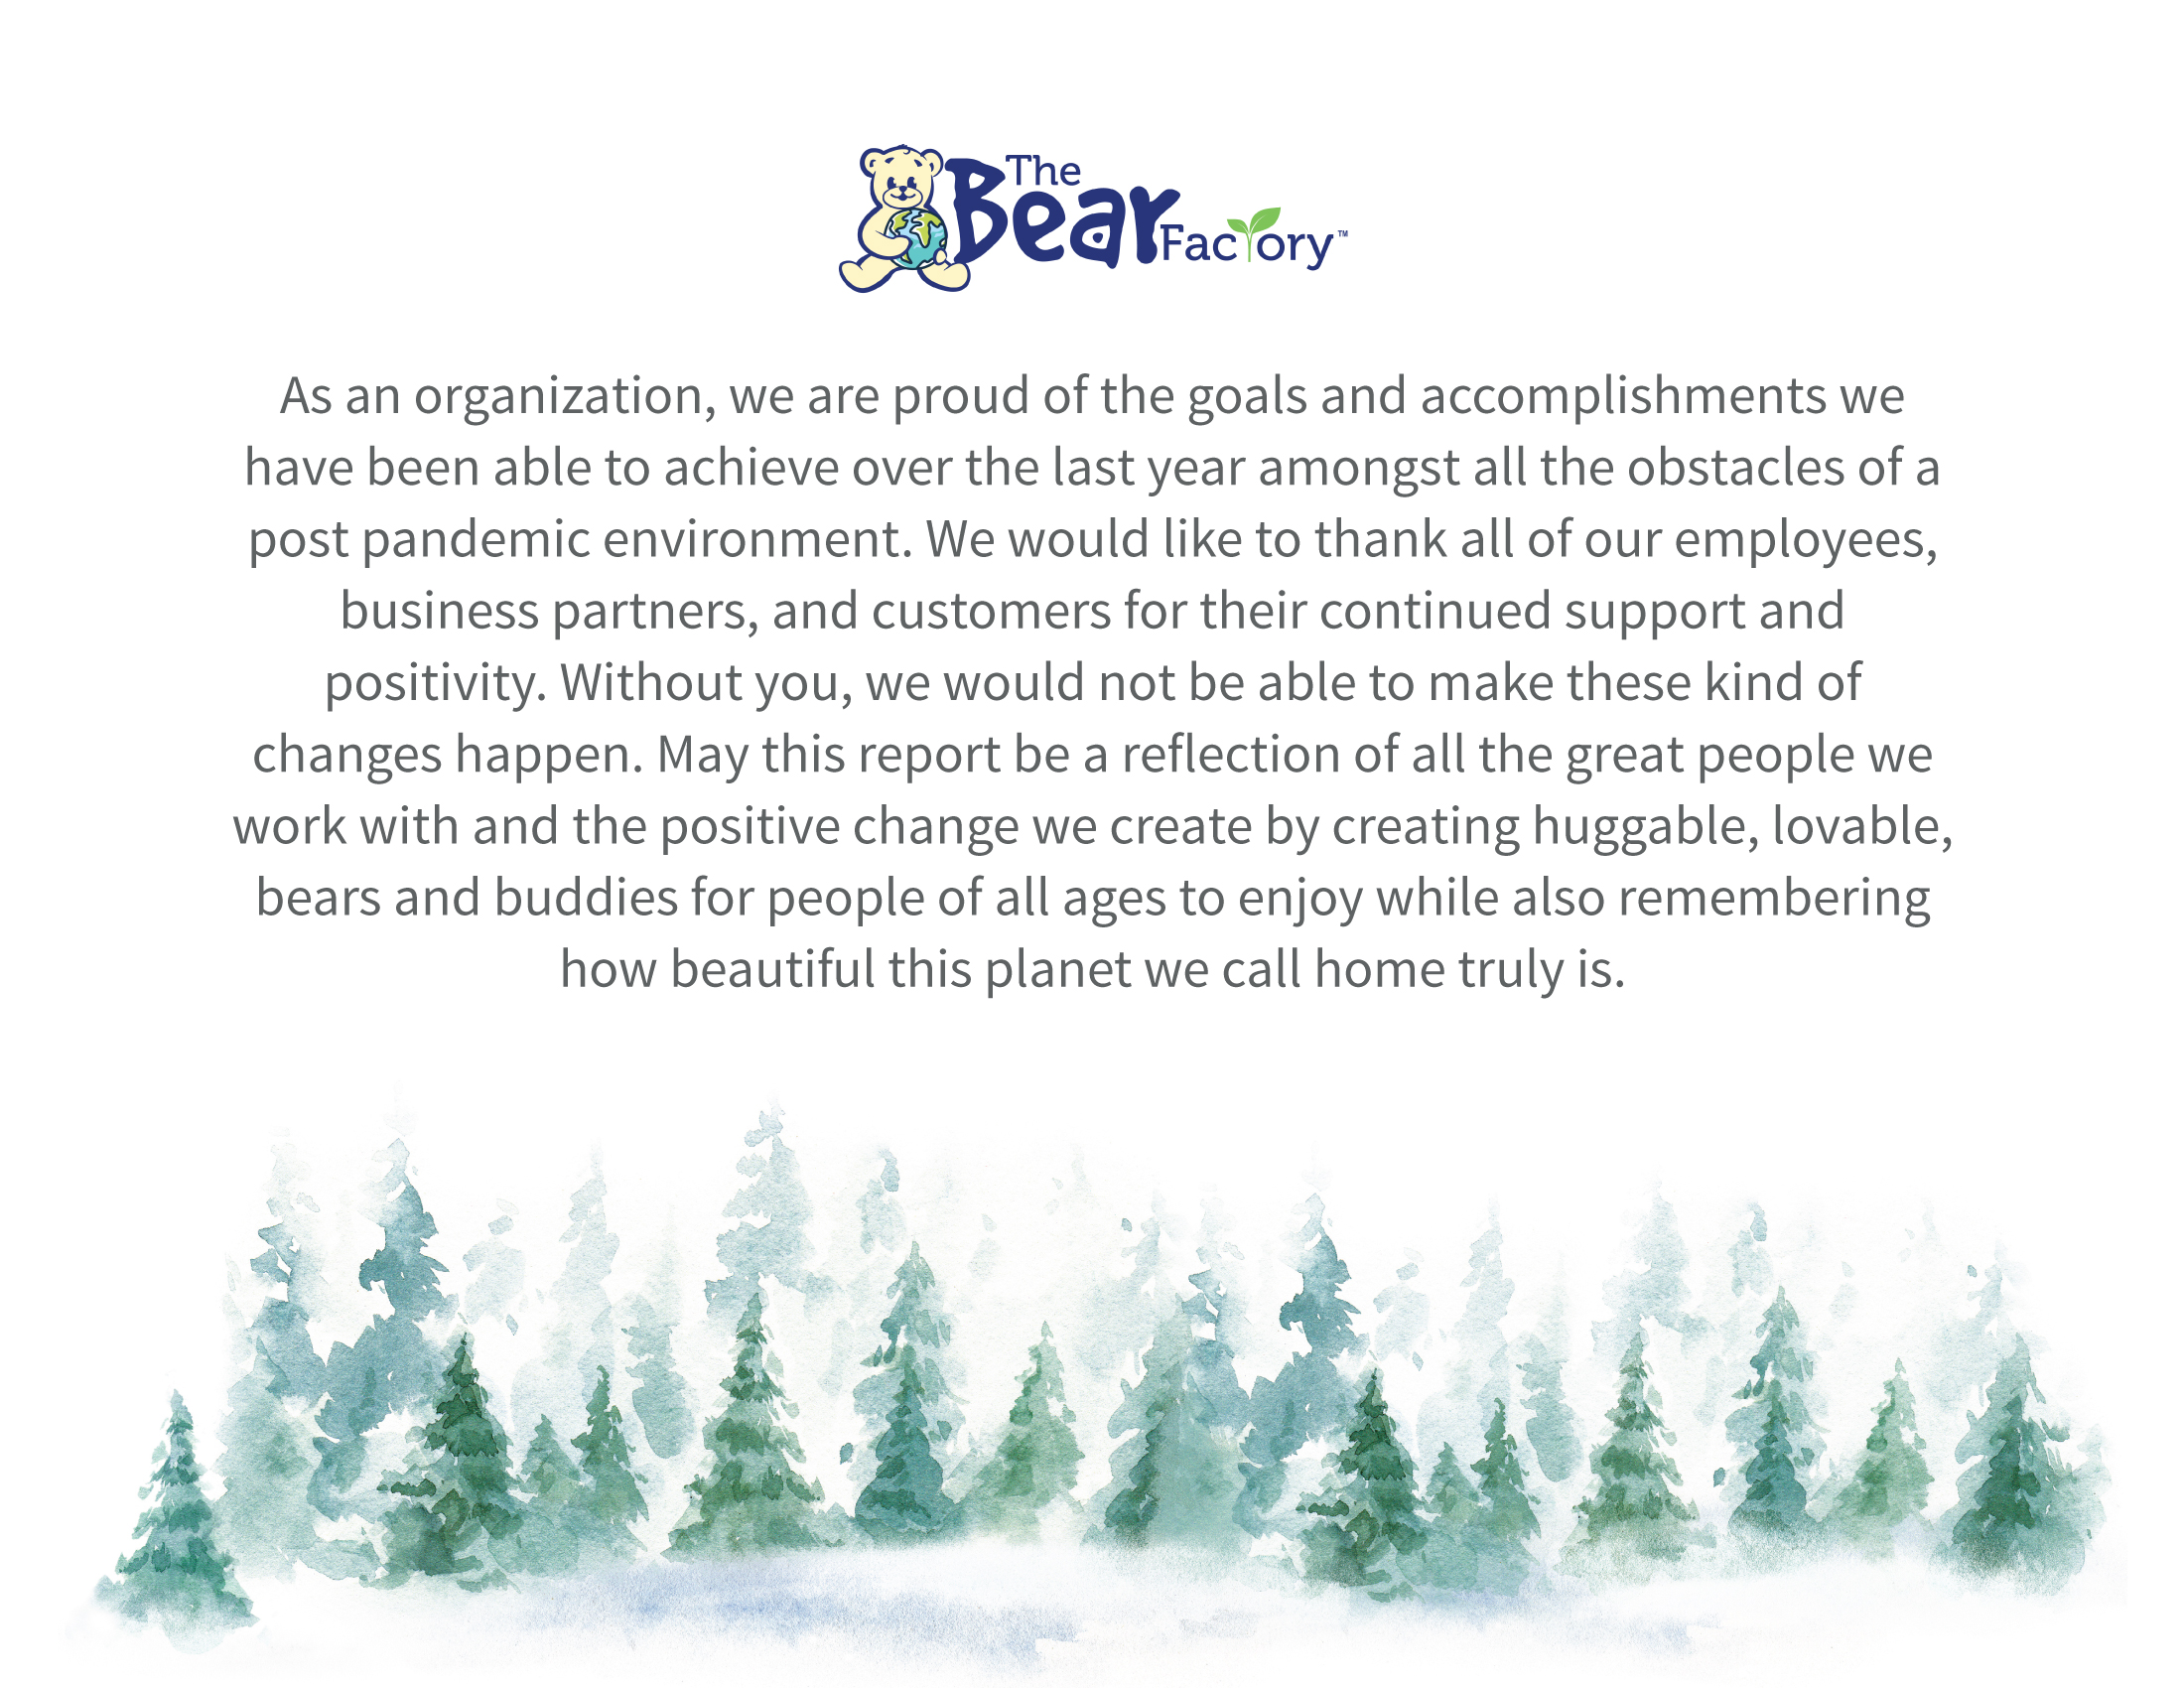 As an organization, we are proud of the goals and accomplishments we have been able to achieve over the last year amongst all the obstacles of a post pandemic environment. We would like to thank all of our employees, business partners, and customers for their continued support and positivity. Without you, we would not be able to make these kind of changes happen. May this report be a reflection of all the great people we work with and the positive change we create by creating huggable, lovable, bears and buddies for people of all ages to enjoy while also remembering how beautiful this planet we call home truly is.